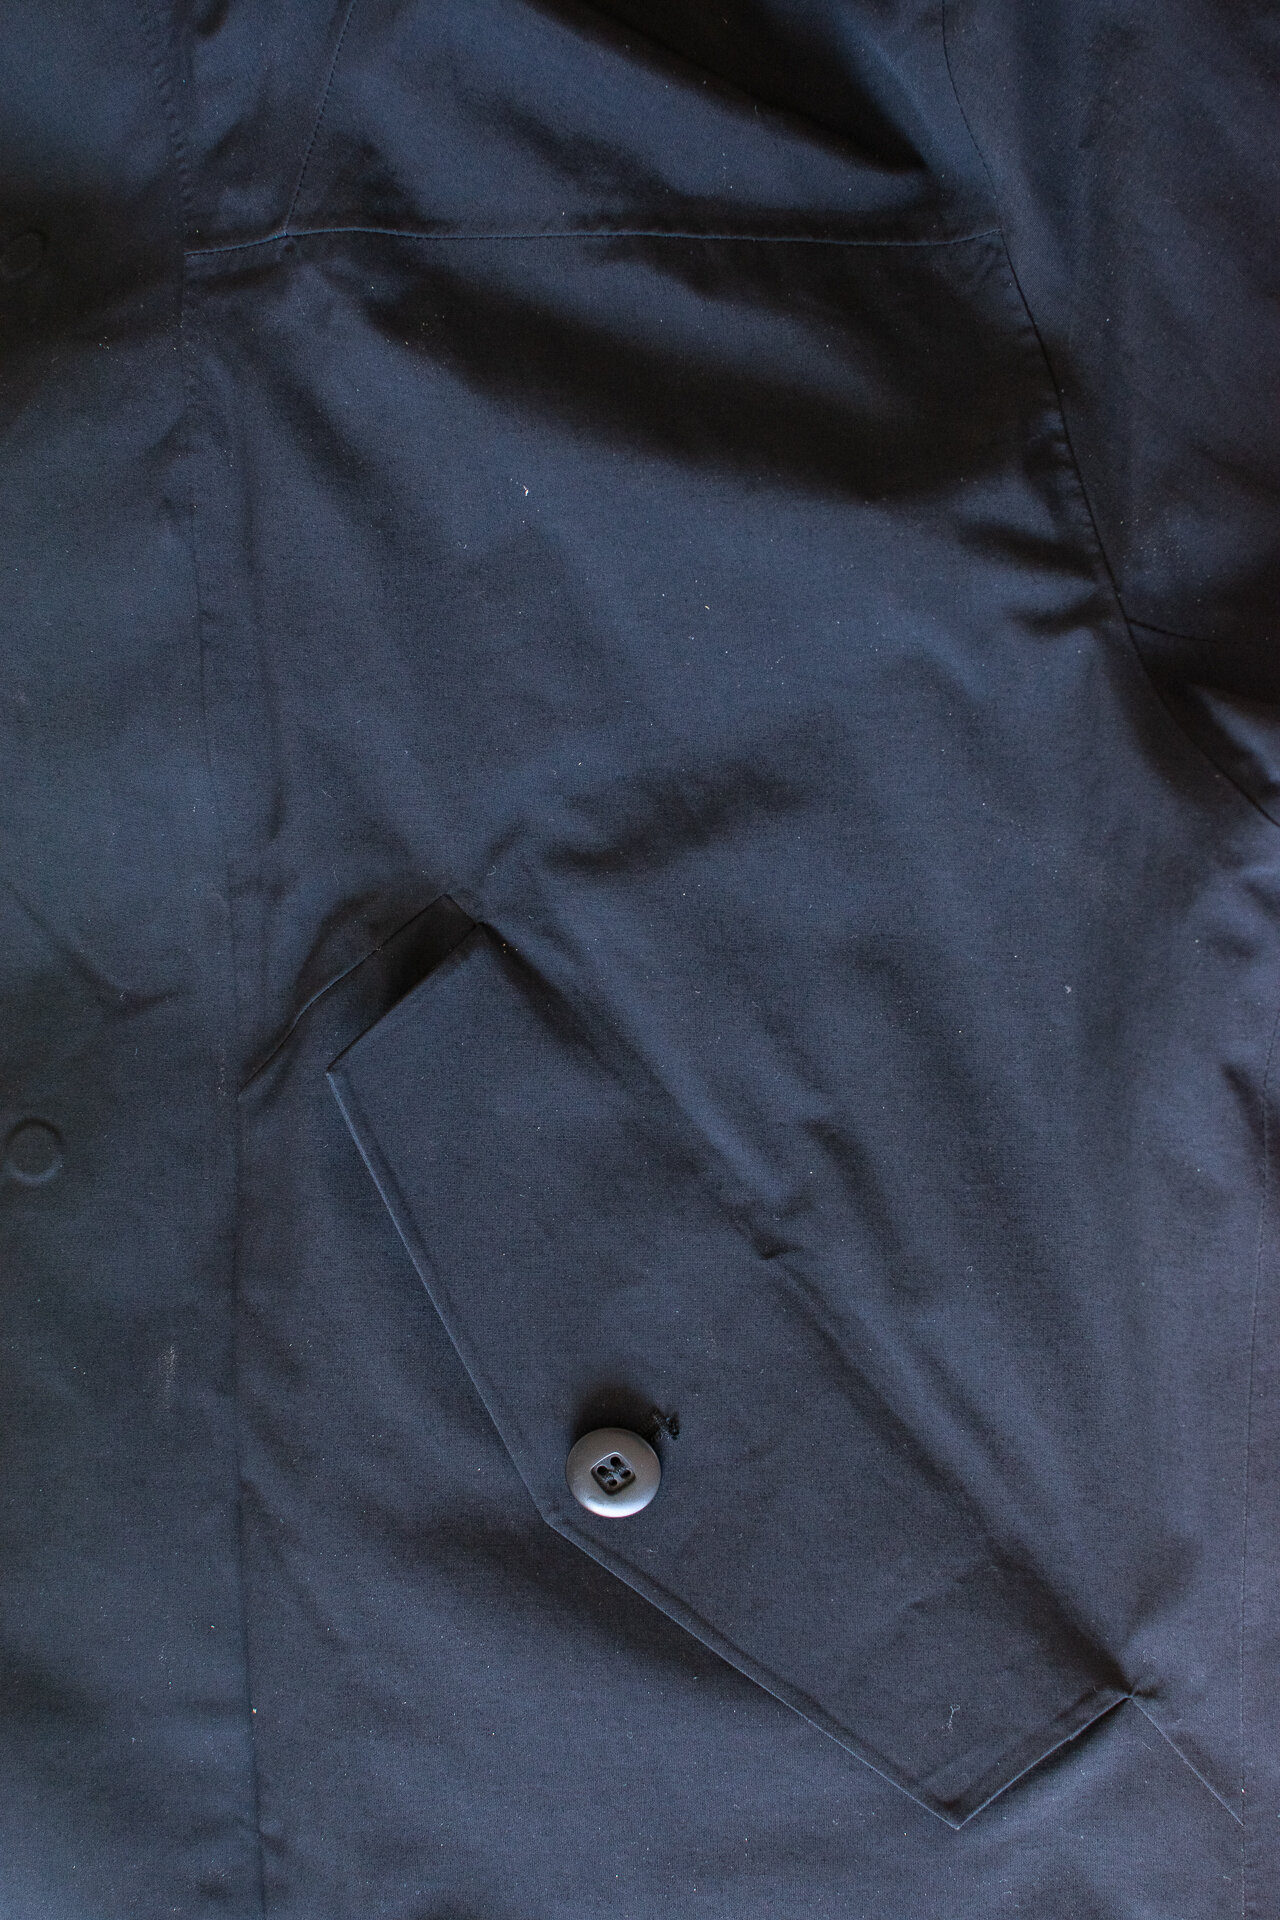 Review: Norrøna oslo GORE-TEX Insulated Parka (2018) — Coatchecking